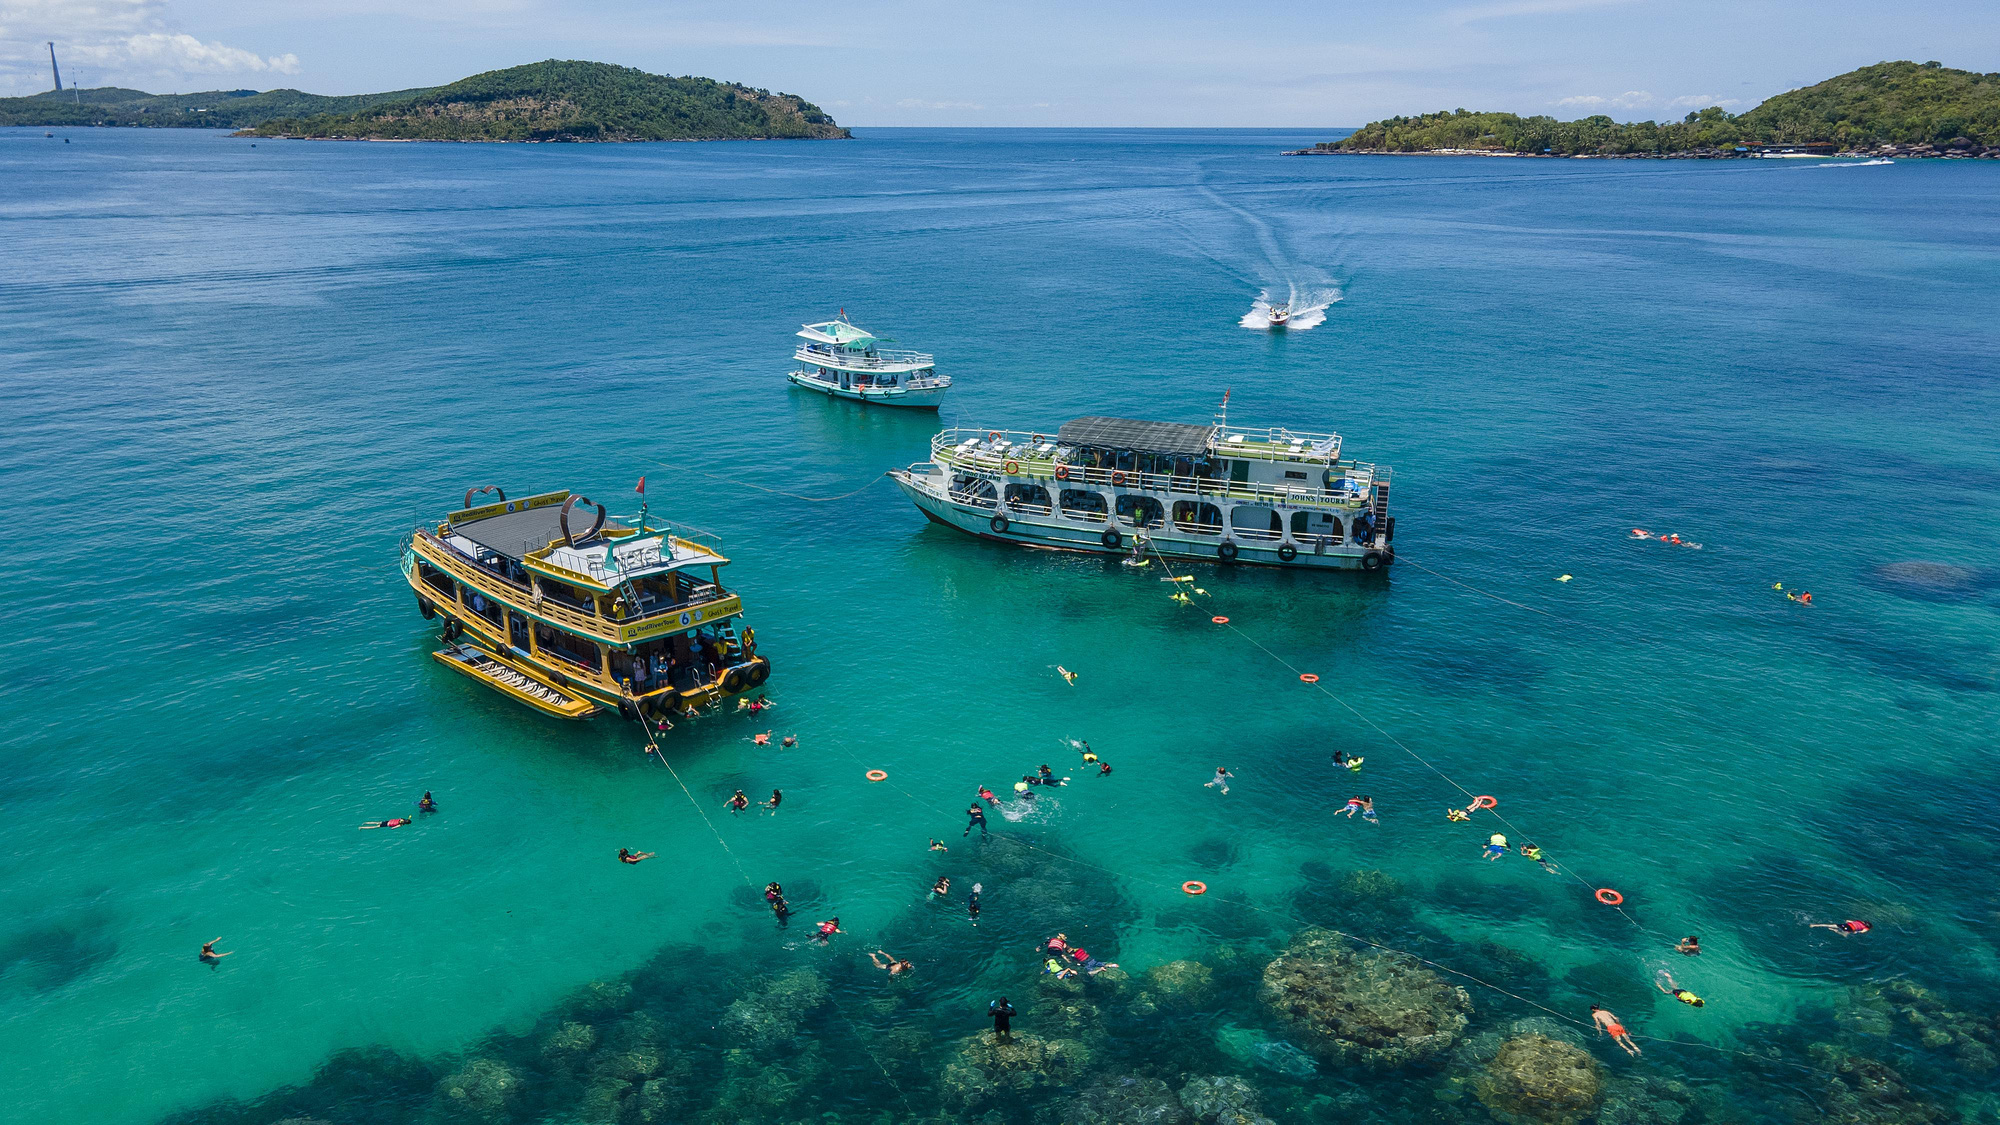 Boats wait for tourists to go swimming and snorkeling in the waters near Gam Ghi islet, Phu Quoc City, Kien Giang Province, southern Vietnam. Photo: Hoang Giam / Tuoi Tre